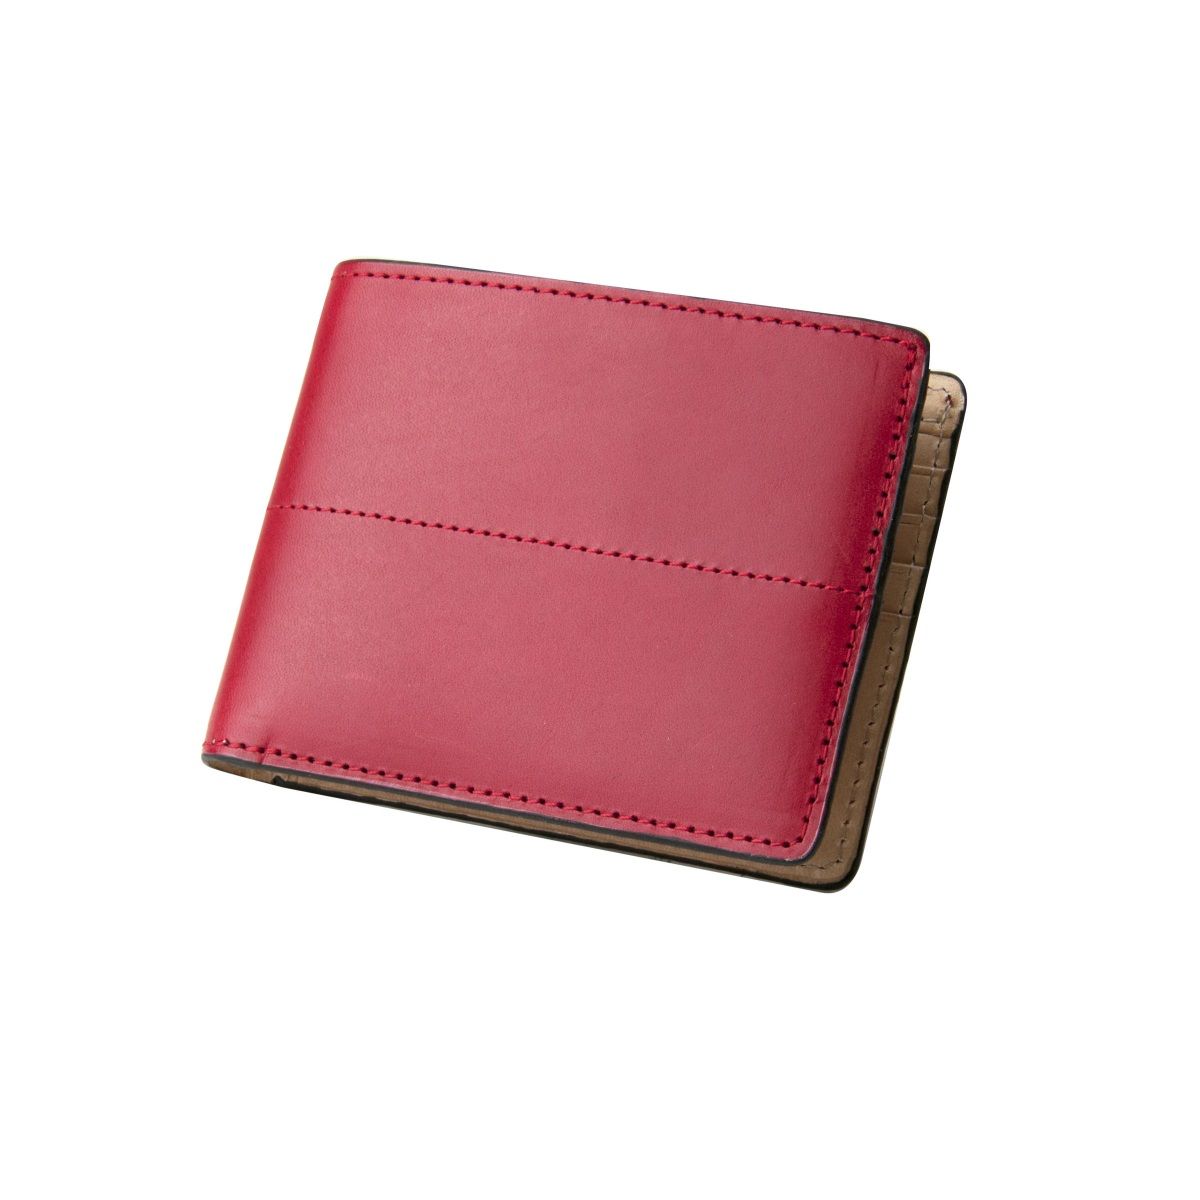 J.FOLD Thunderbird Leather Wallet - Red